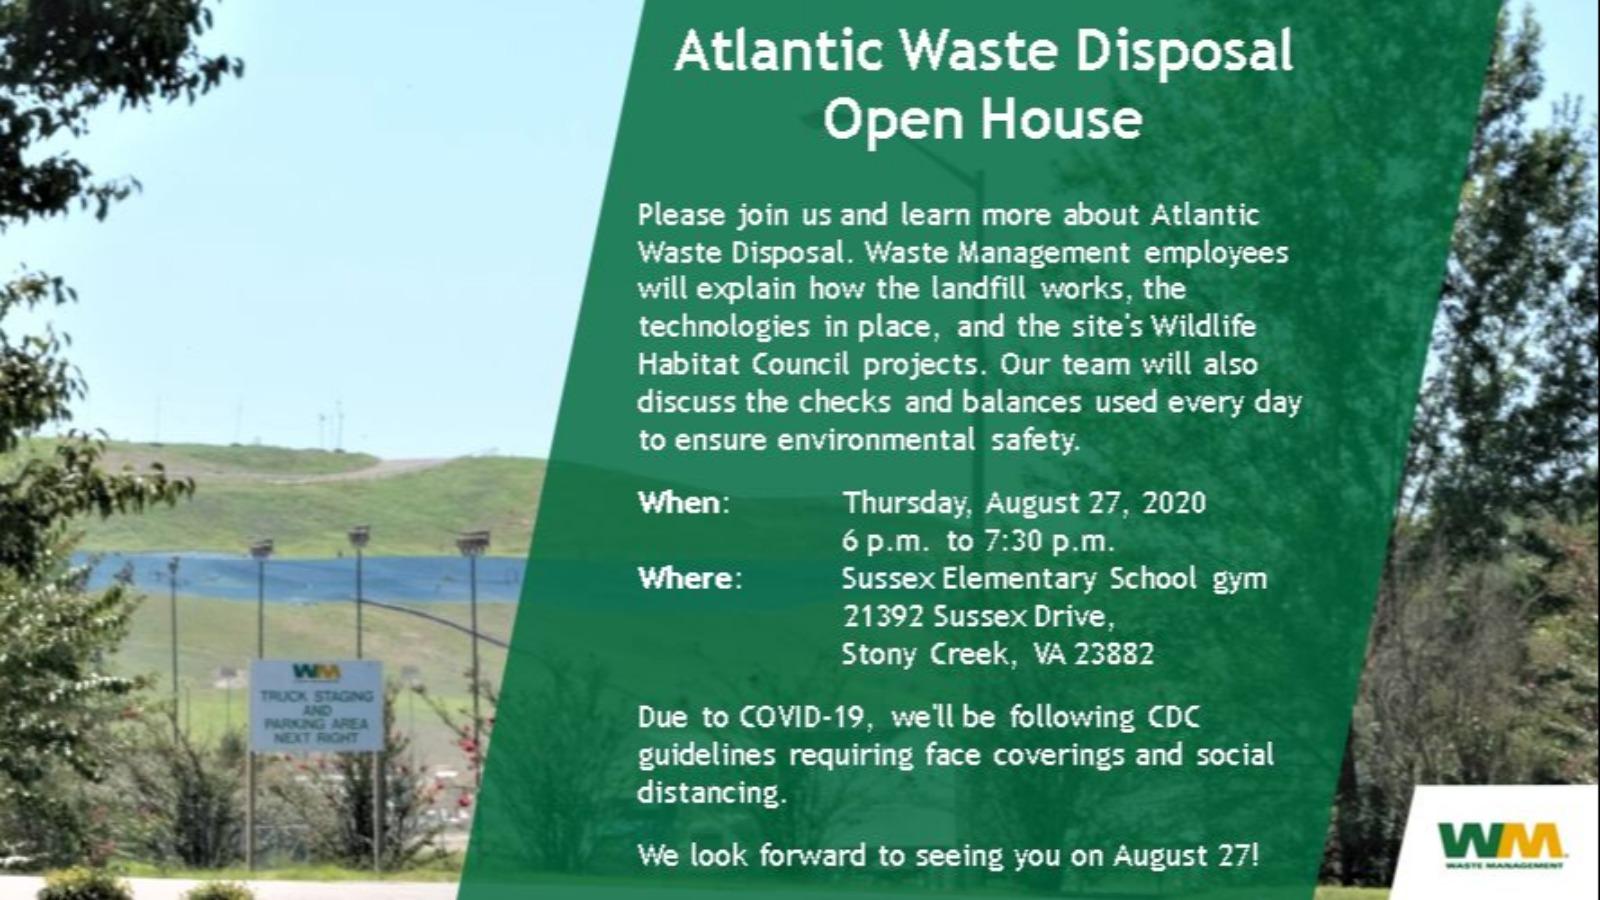 Atlantic Waste Disposal Open House at the Sussex Elementary School Gym